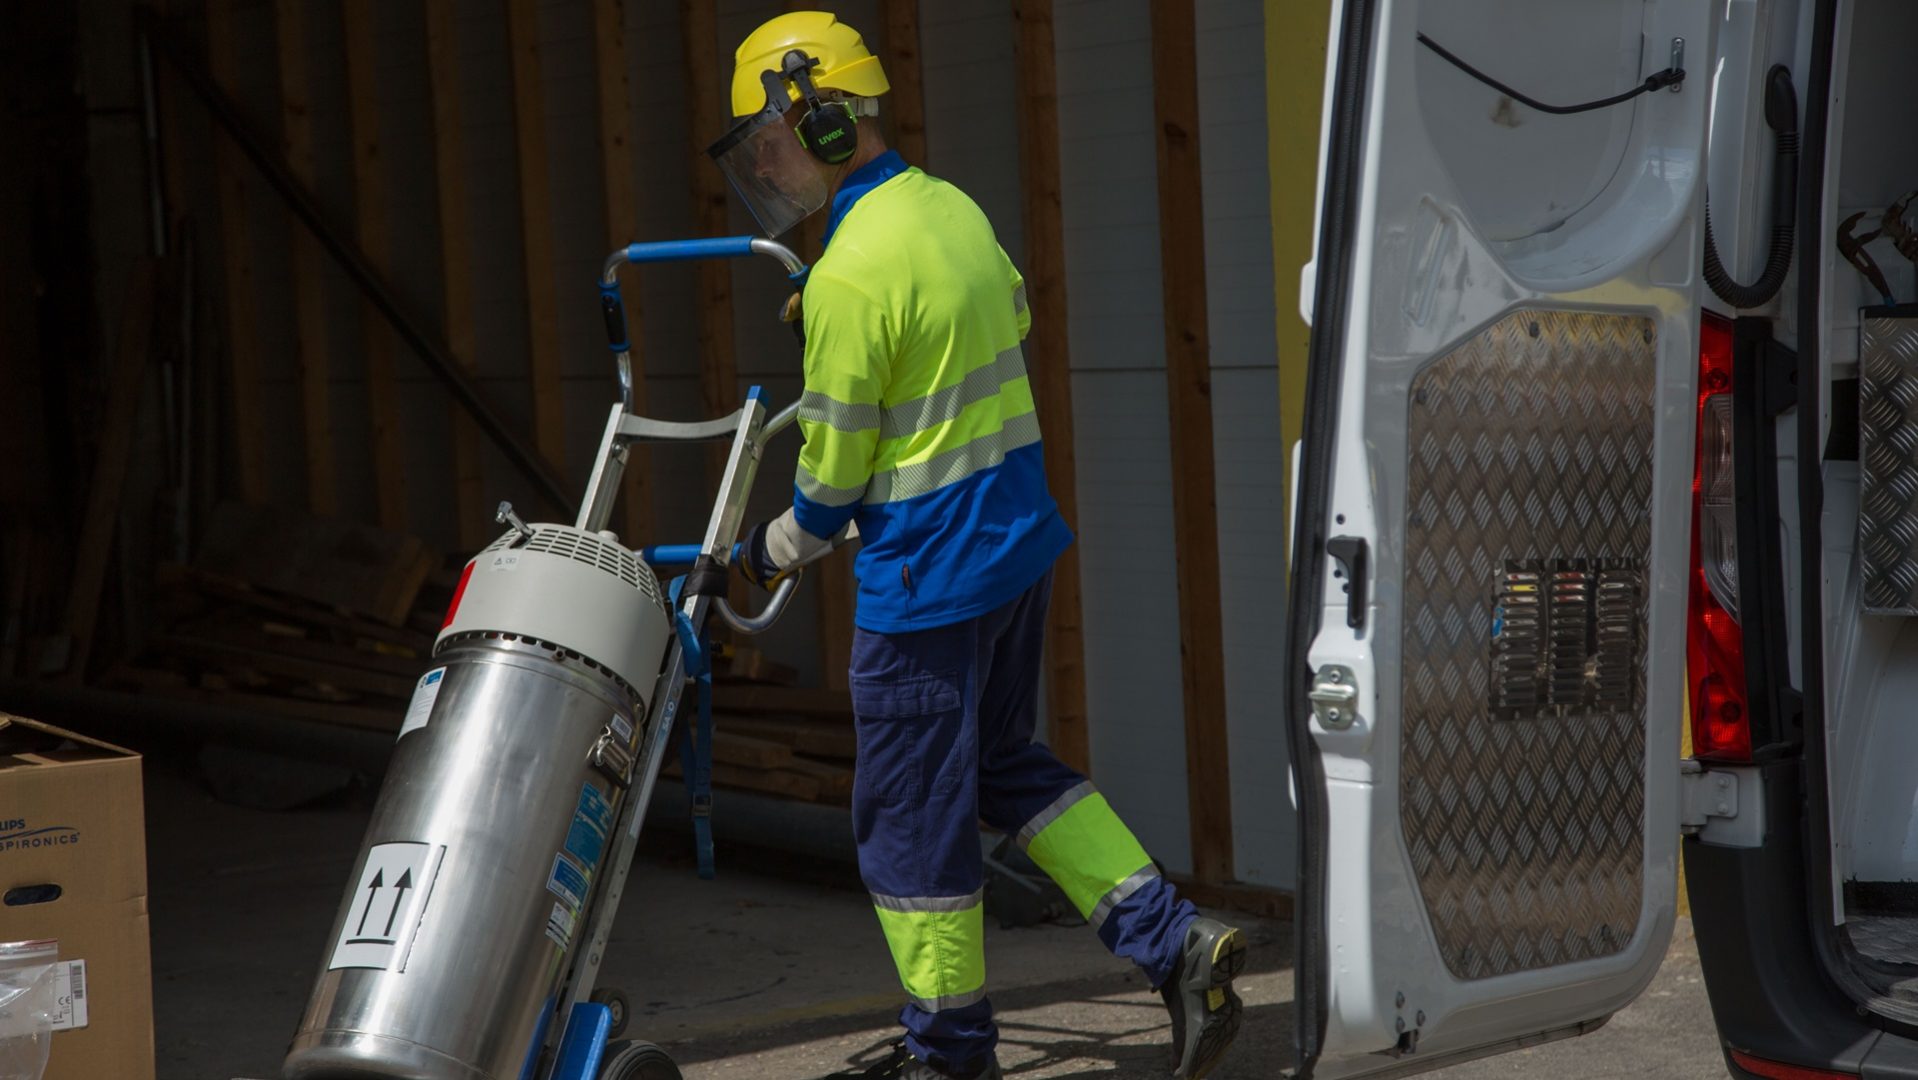 A worker in high-visibility clothing is unloading a large cylindrical tank from the back of a van using a hand trolley.